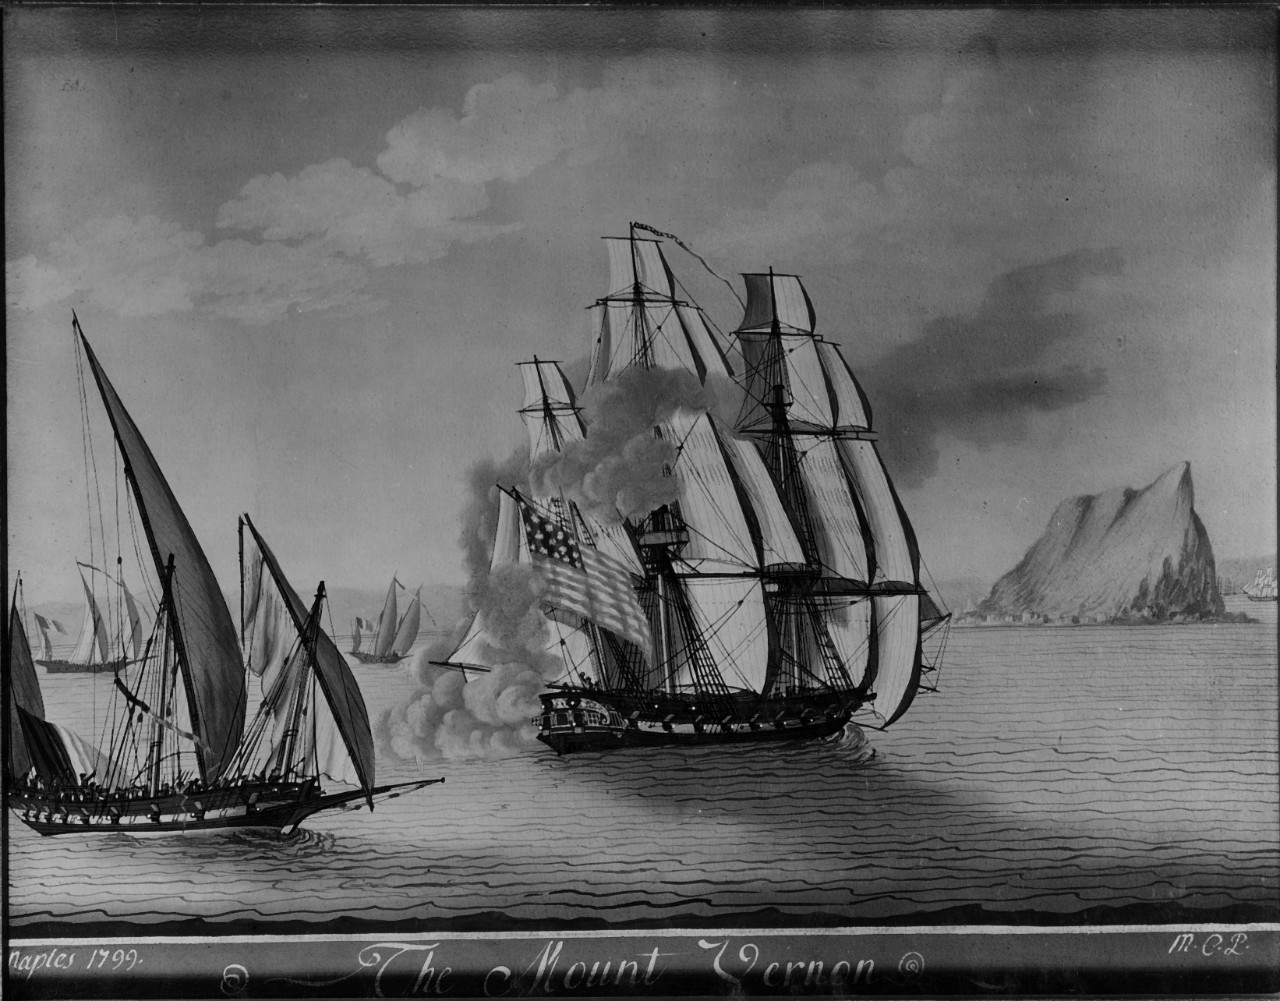 Painting of American ship MOUNT VERNON, Captain Derby, beating off French Privateers in Gibralter Straits, July 31, 1799. 